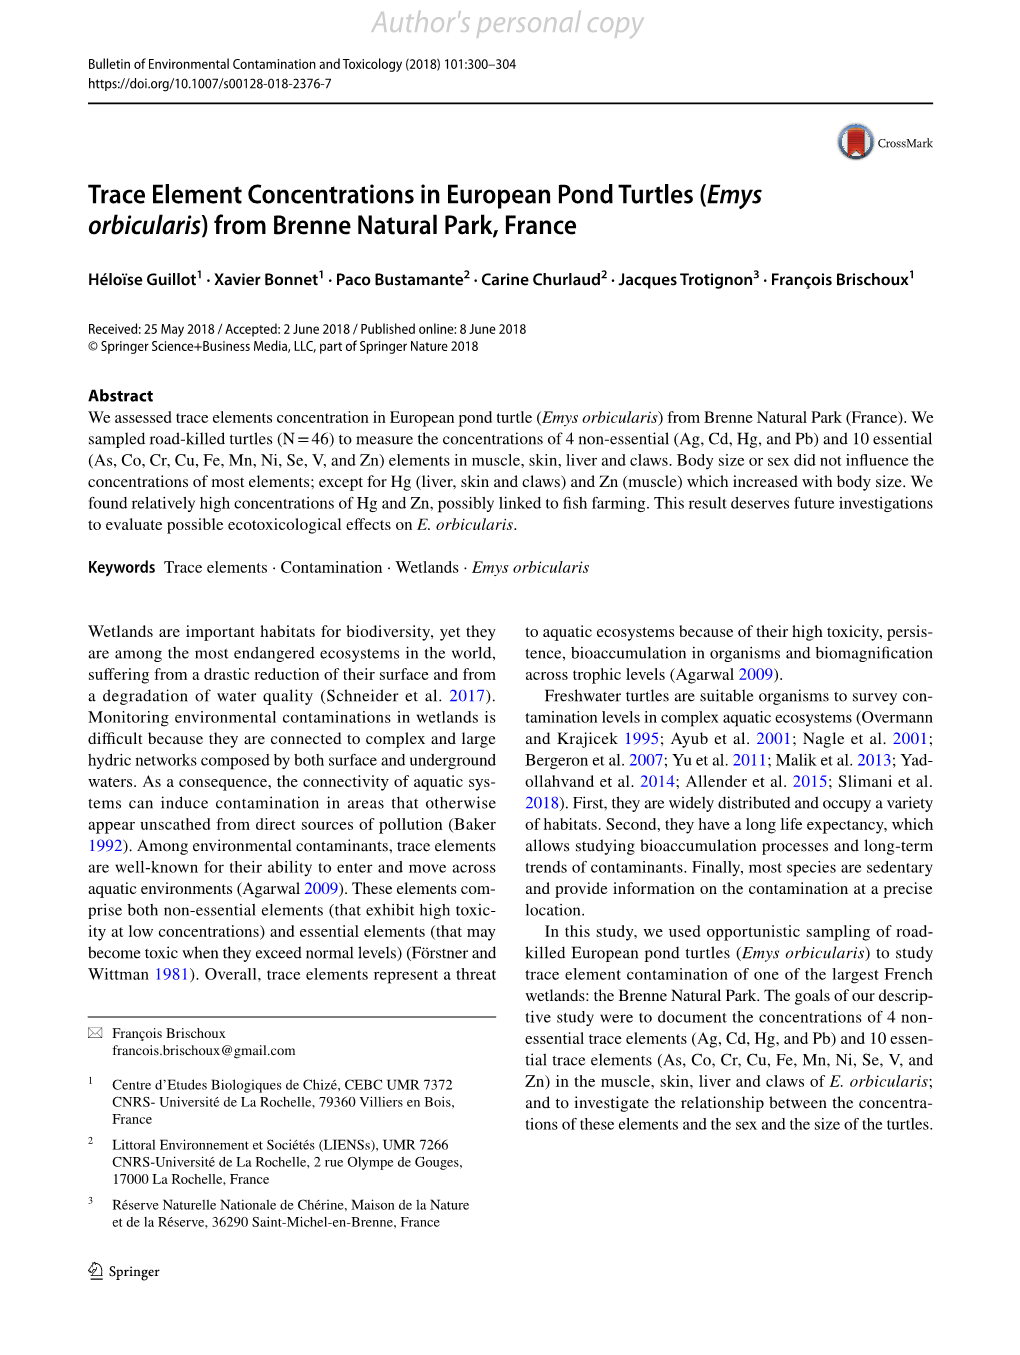 Trace Element Concentrations in European Pond Turtles (Emys Orbicularis) from Brenne Natural Park, France